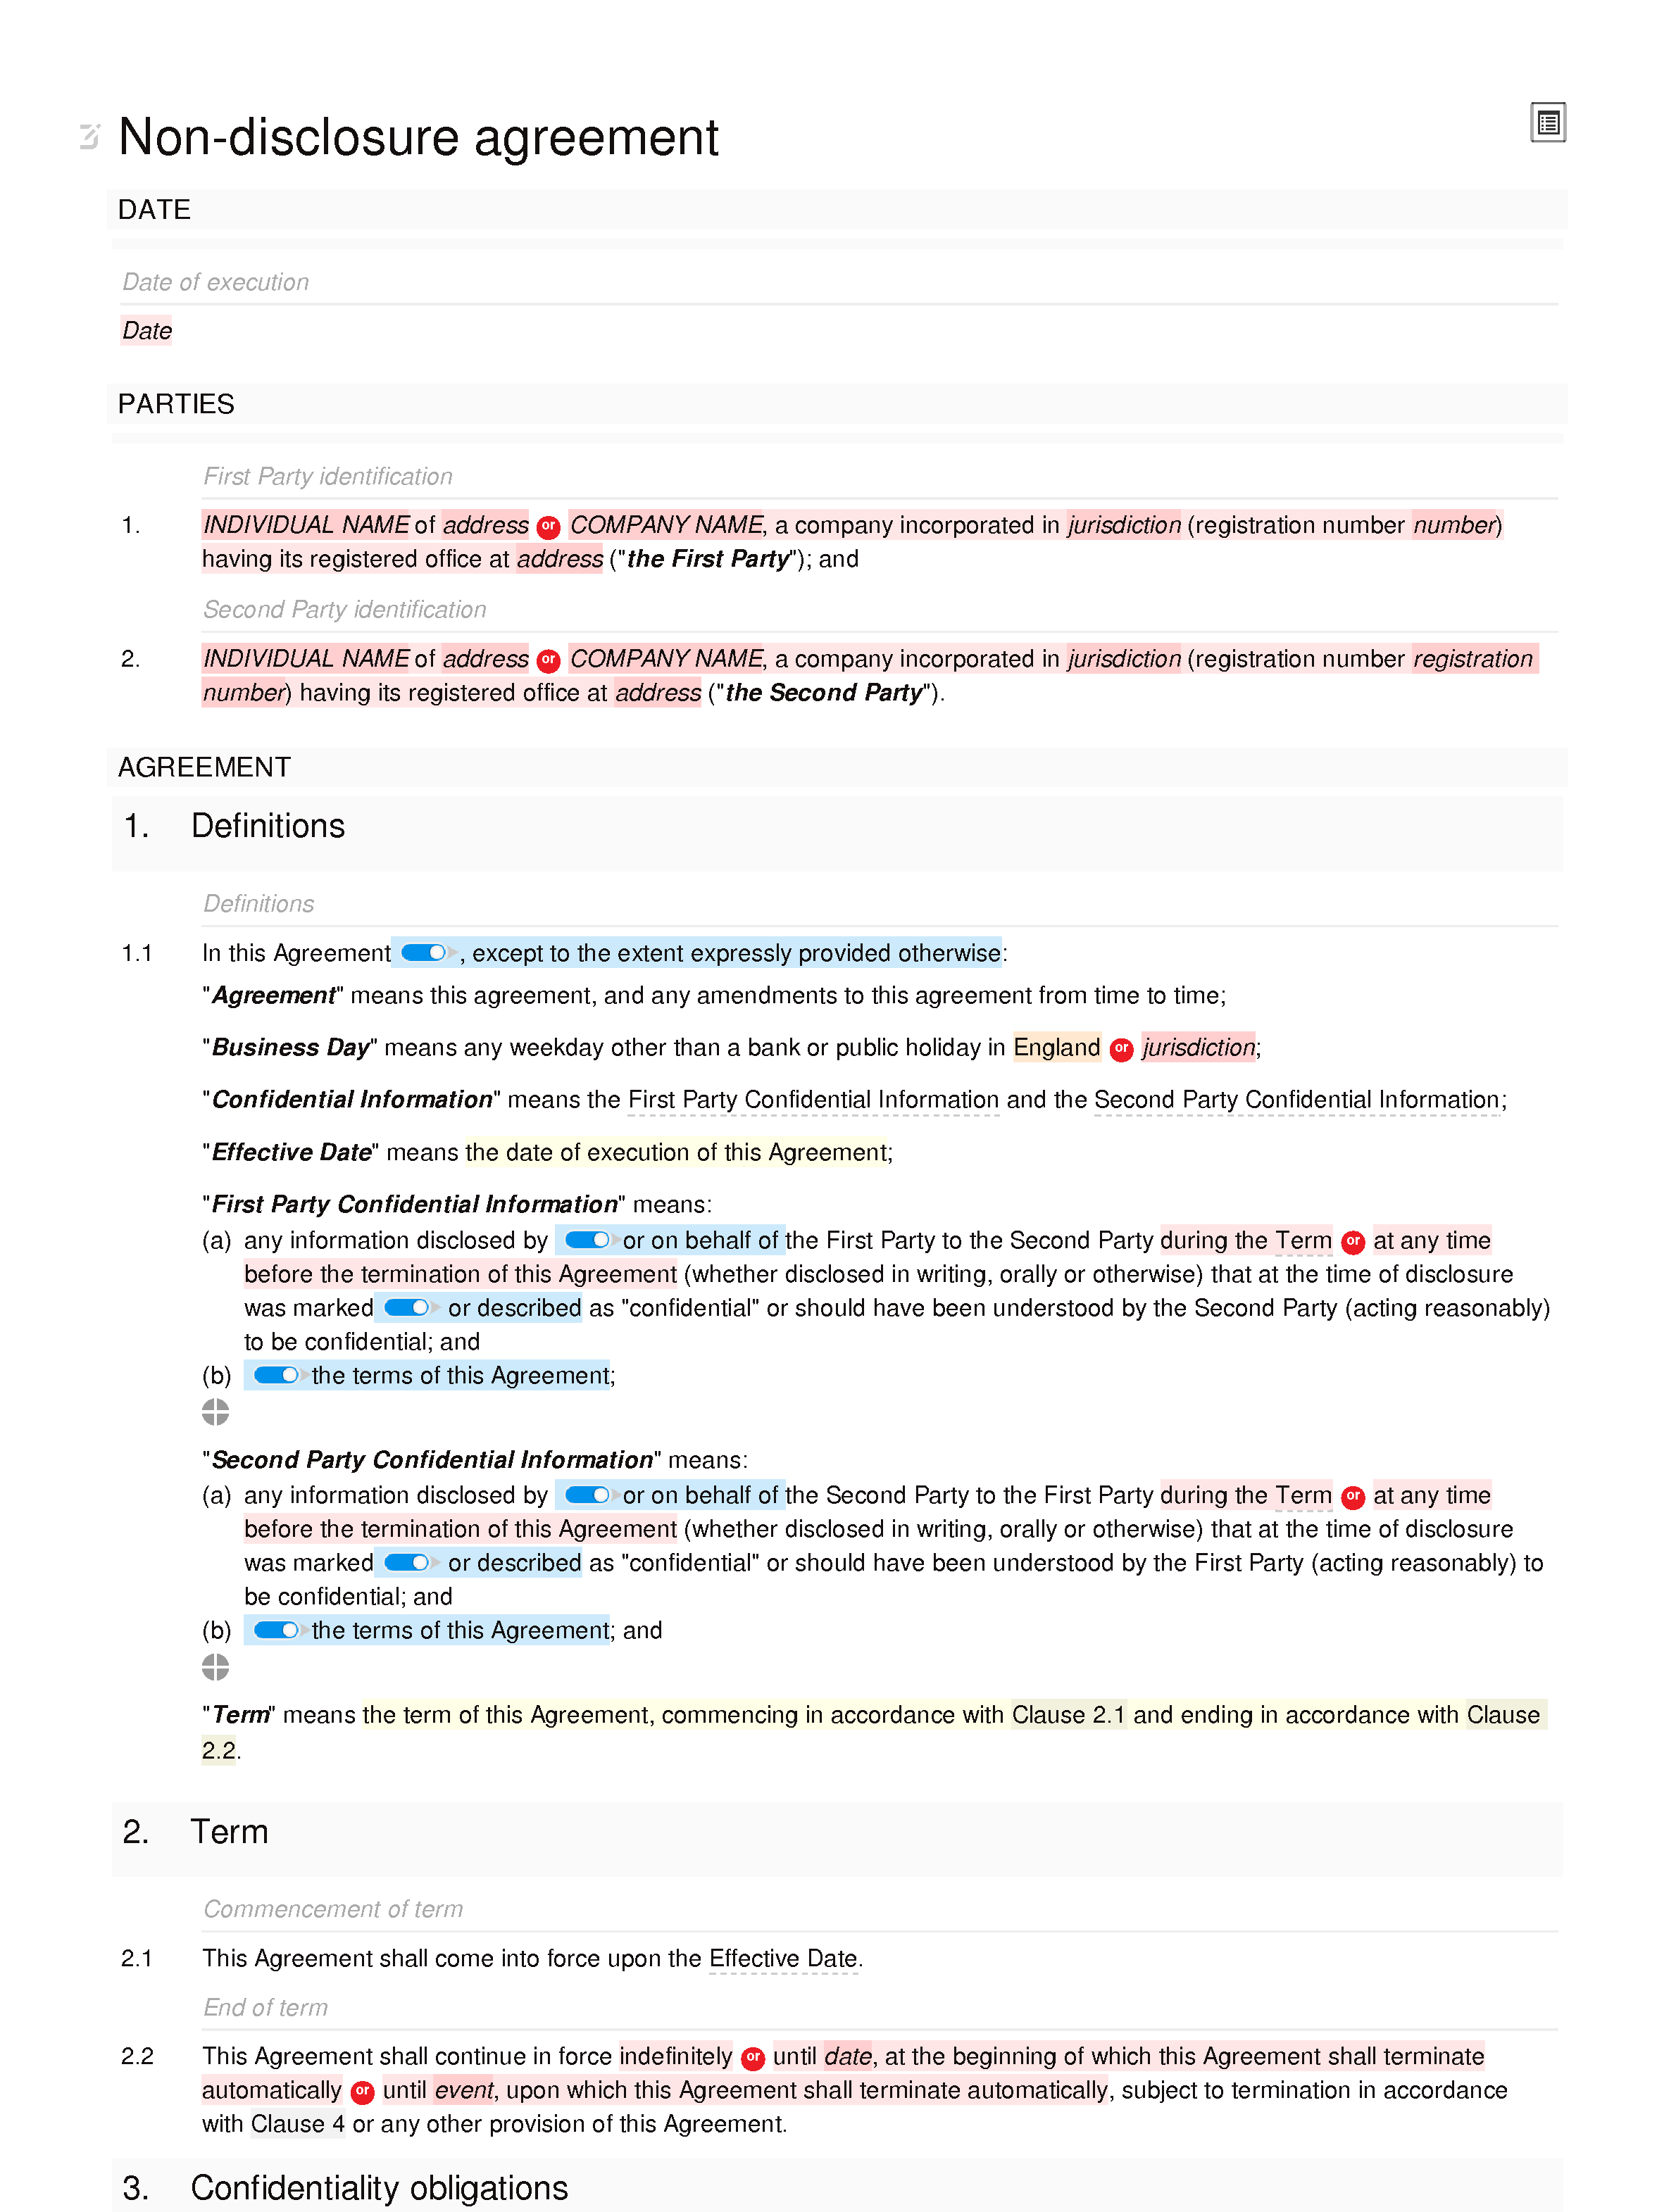 Non-disclosure agreement (mutual, standard) document editor preview